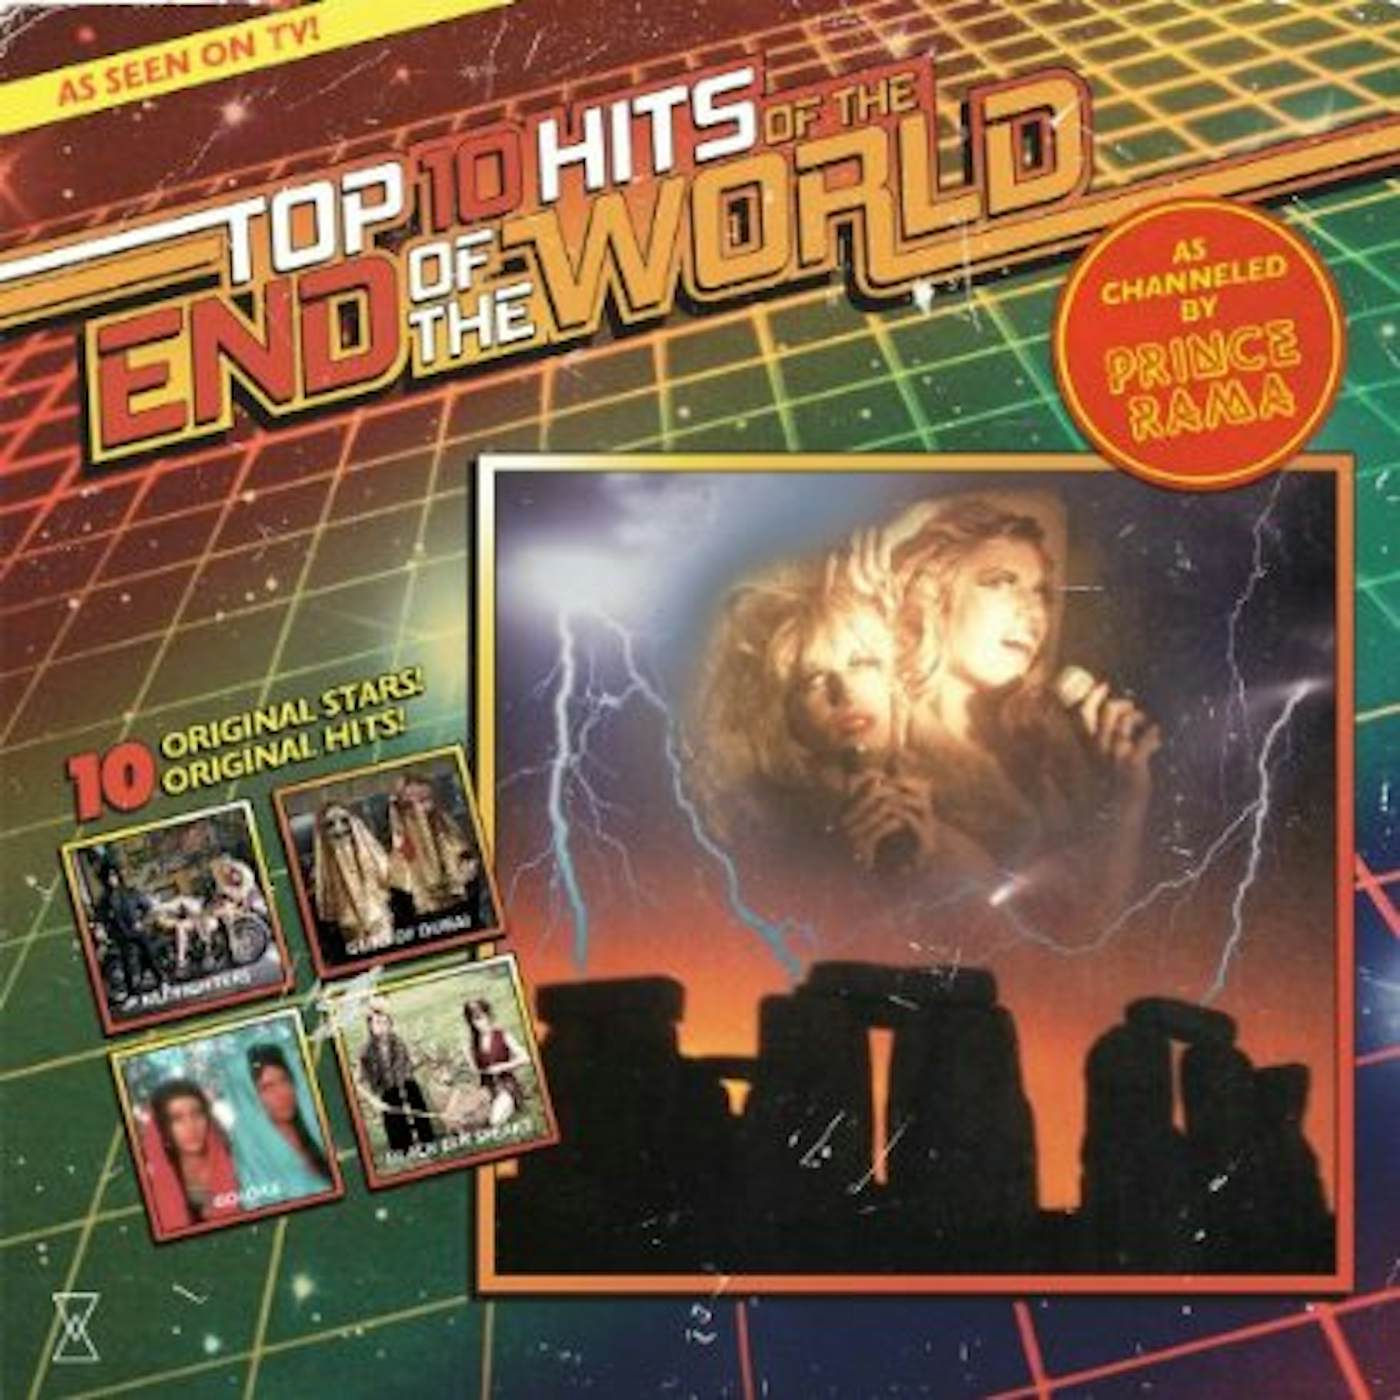 Prince Rama Top Ten Hits of the End of the World Vinyl Record